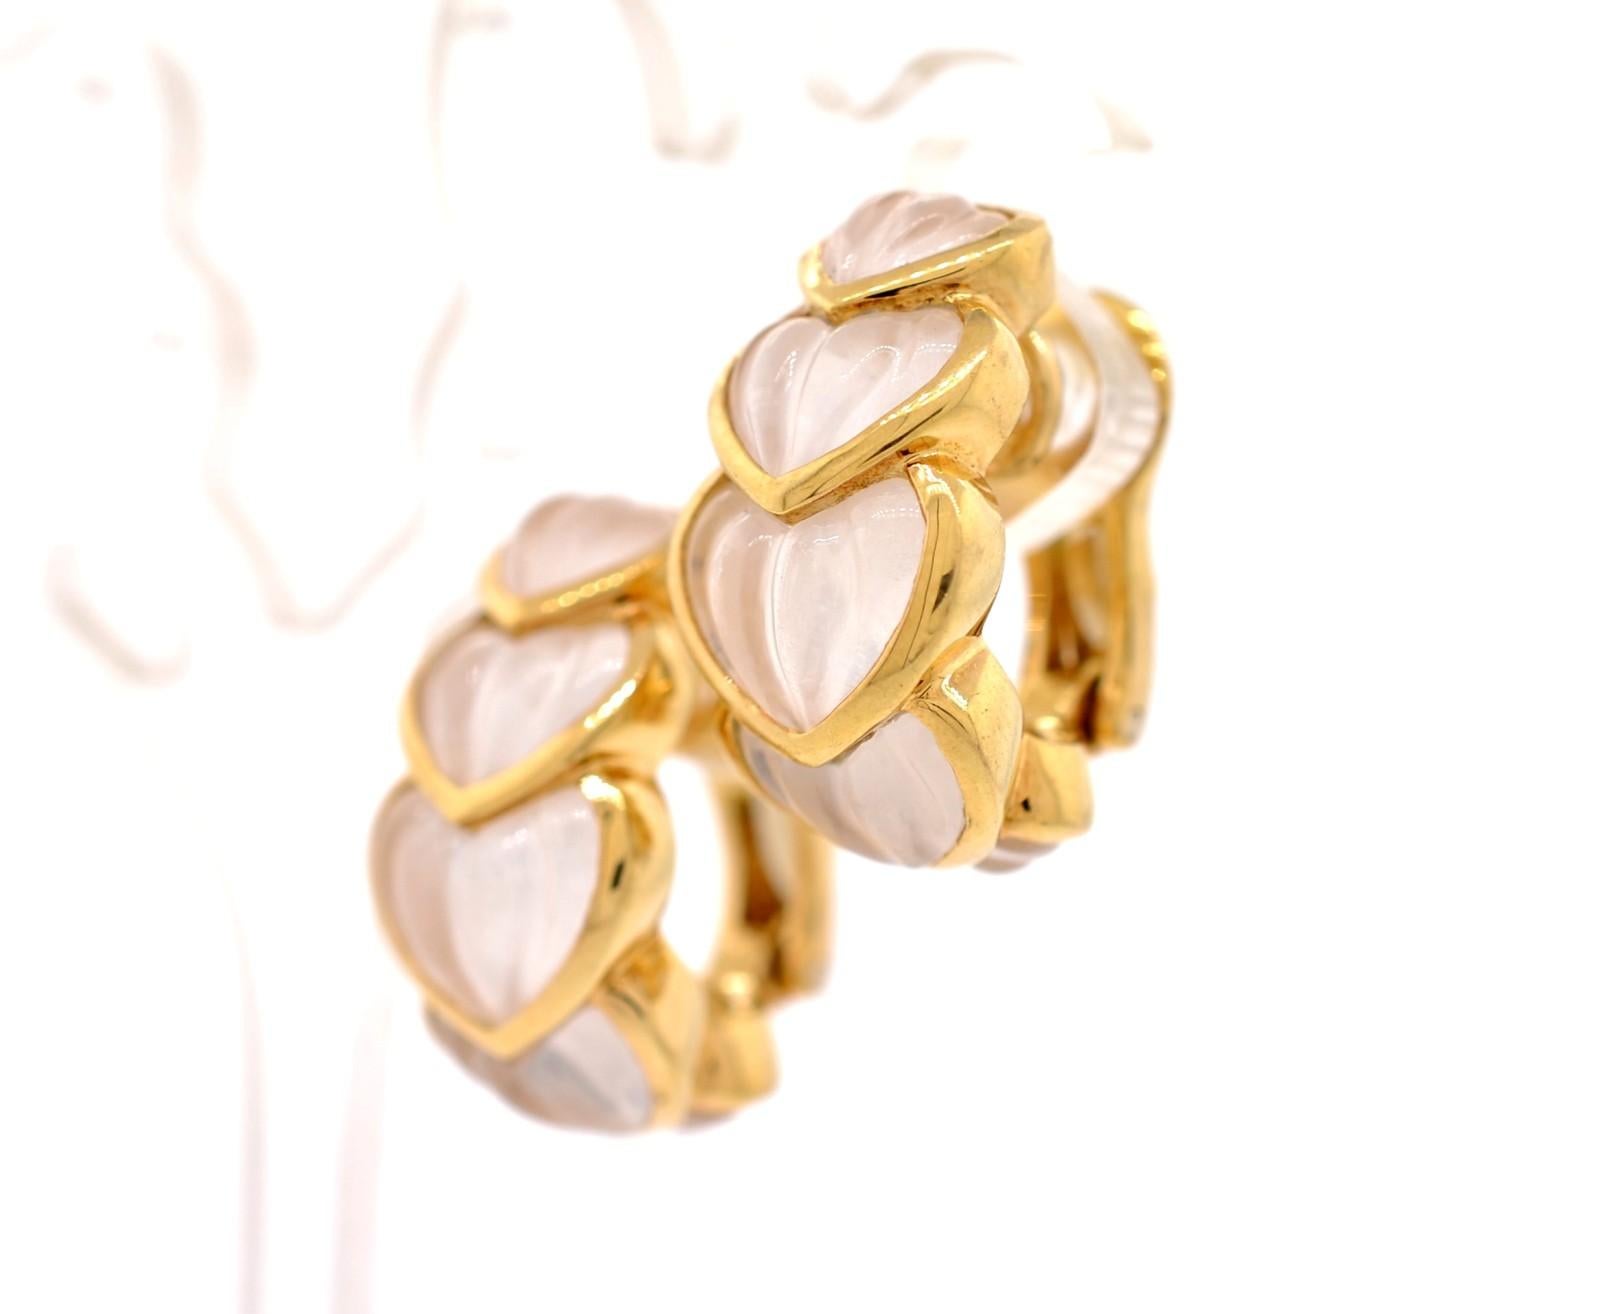 The French House of Boucheron has created these pretty and unusual natural Rock Crystal earrings. The 1/2 hoop designs each embrace 5 bezel-set carved heart-shaped rock crystals. The rich 18K yellow gold makes them stand out. With omega backs and